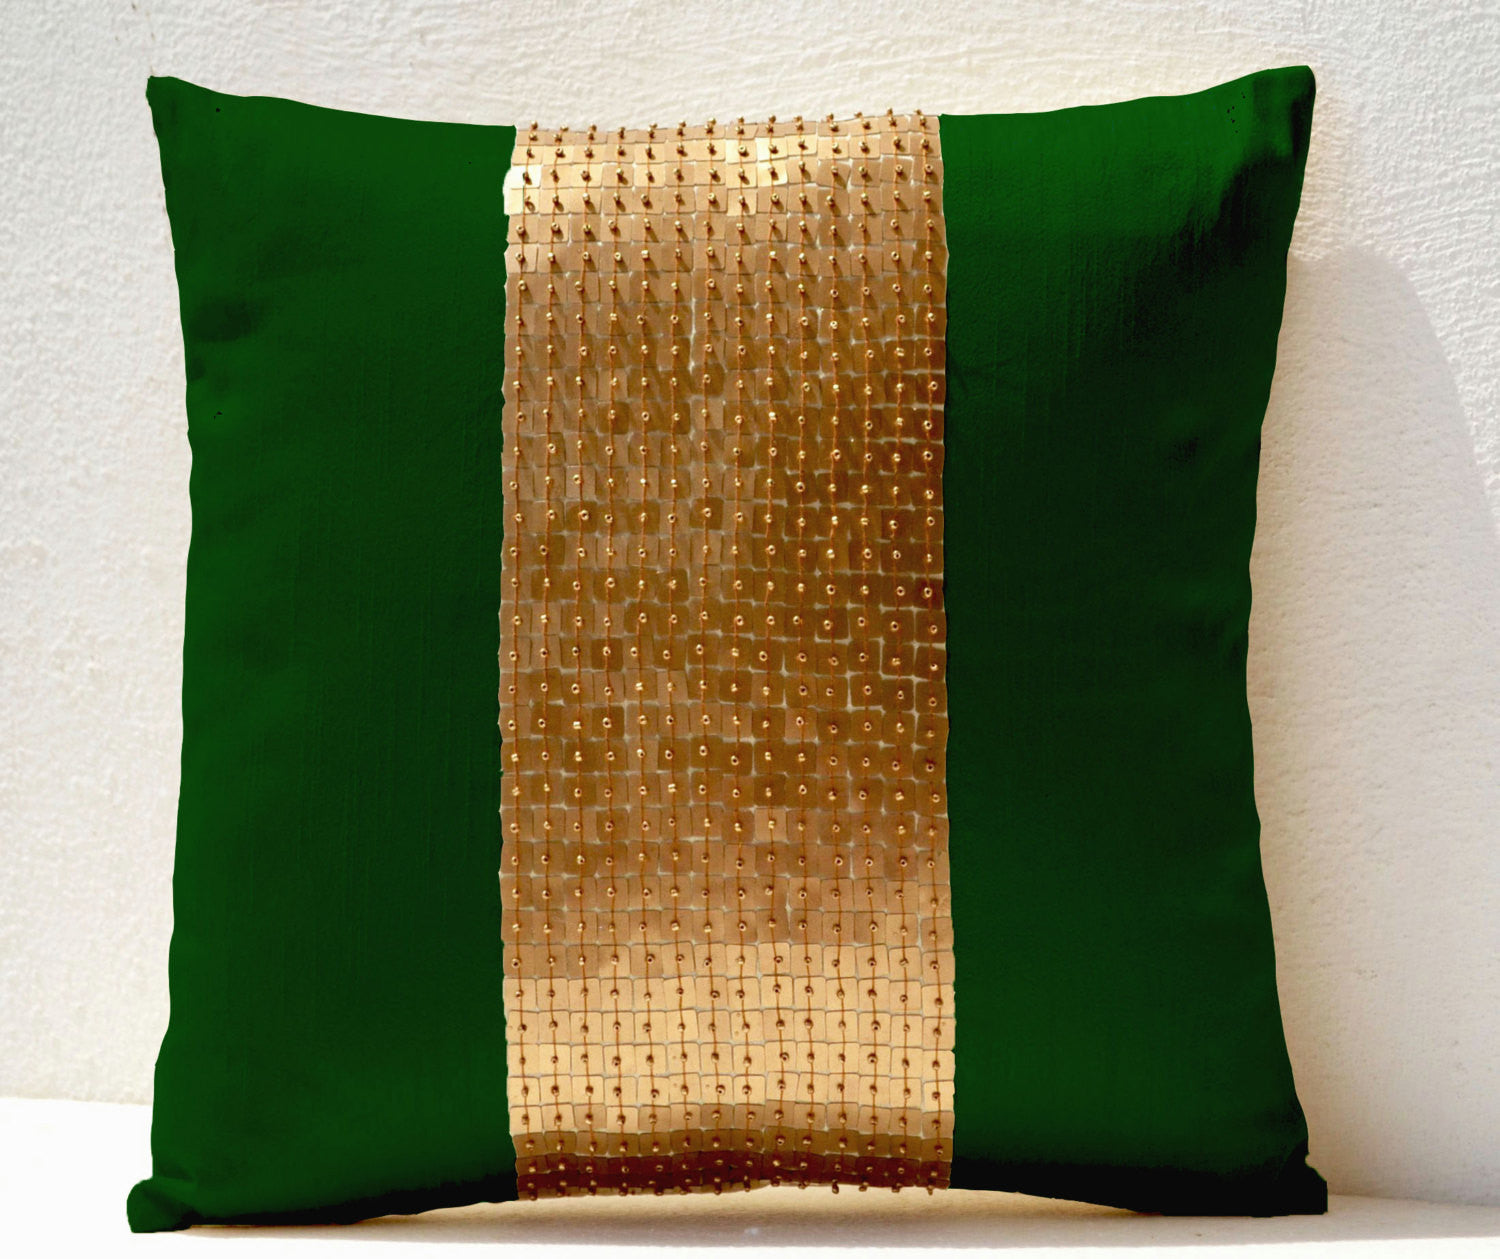 Handmade emerald green throw pillow with gold color, silk sequin and beads